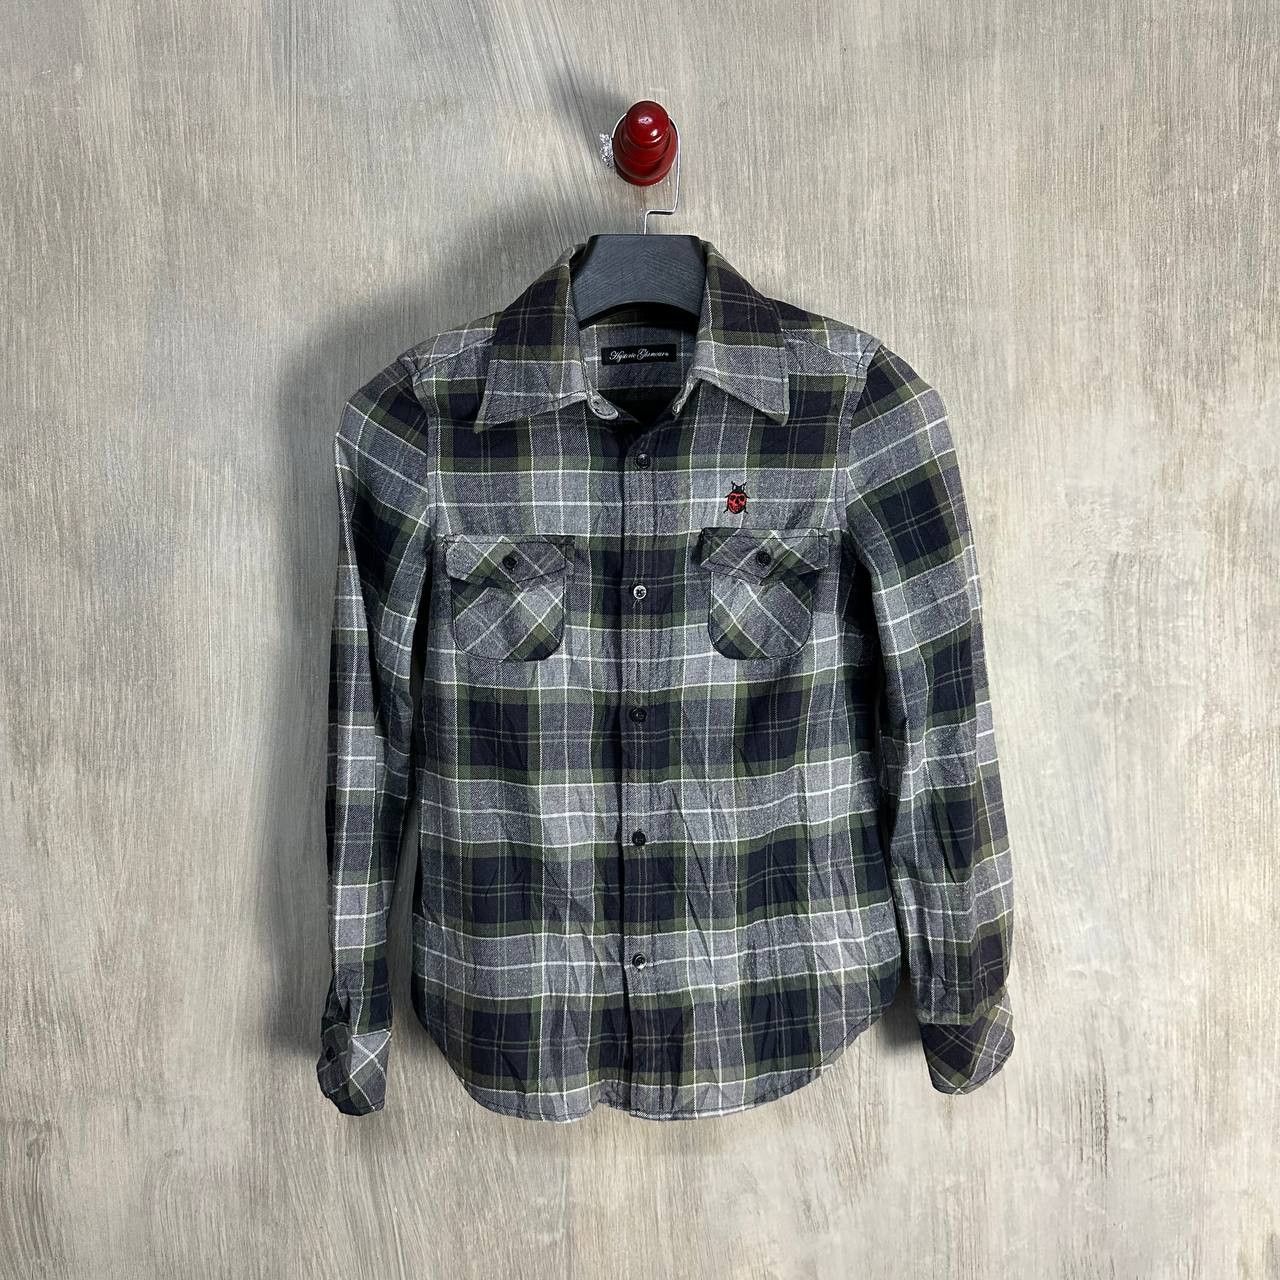 Hysteric Glamour Hysteric Glamour Plaid Flannel Shirt Size Small | Grailed